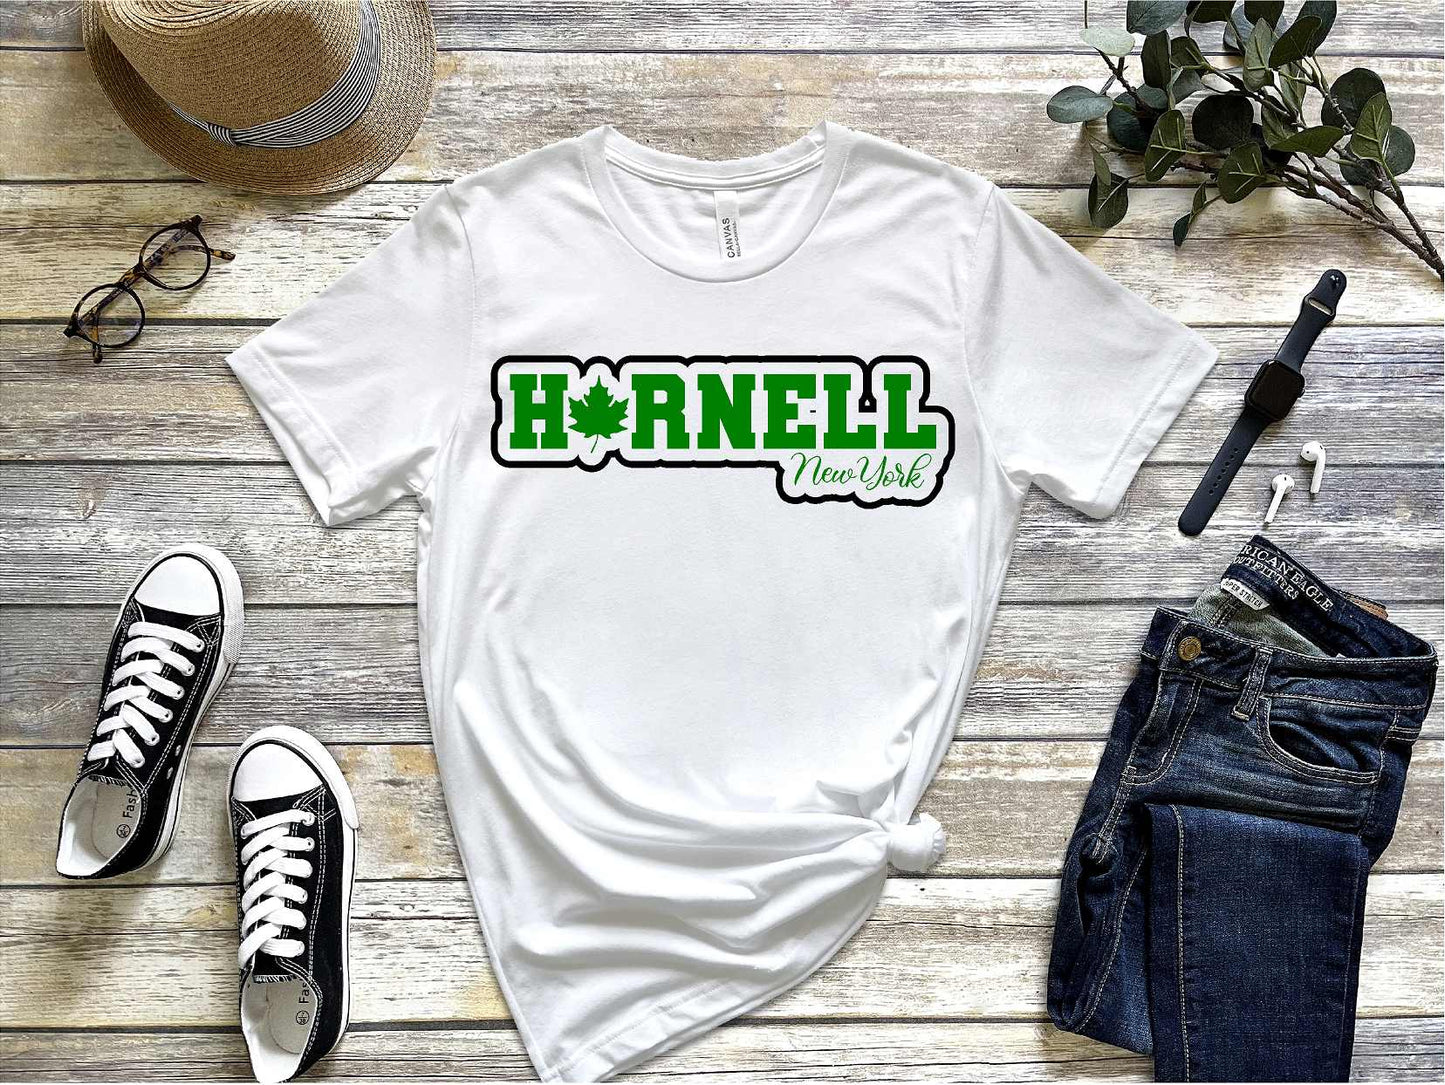 Hornell Maple City Shirt Unisex adult or youth Bella tshirt BC3001